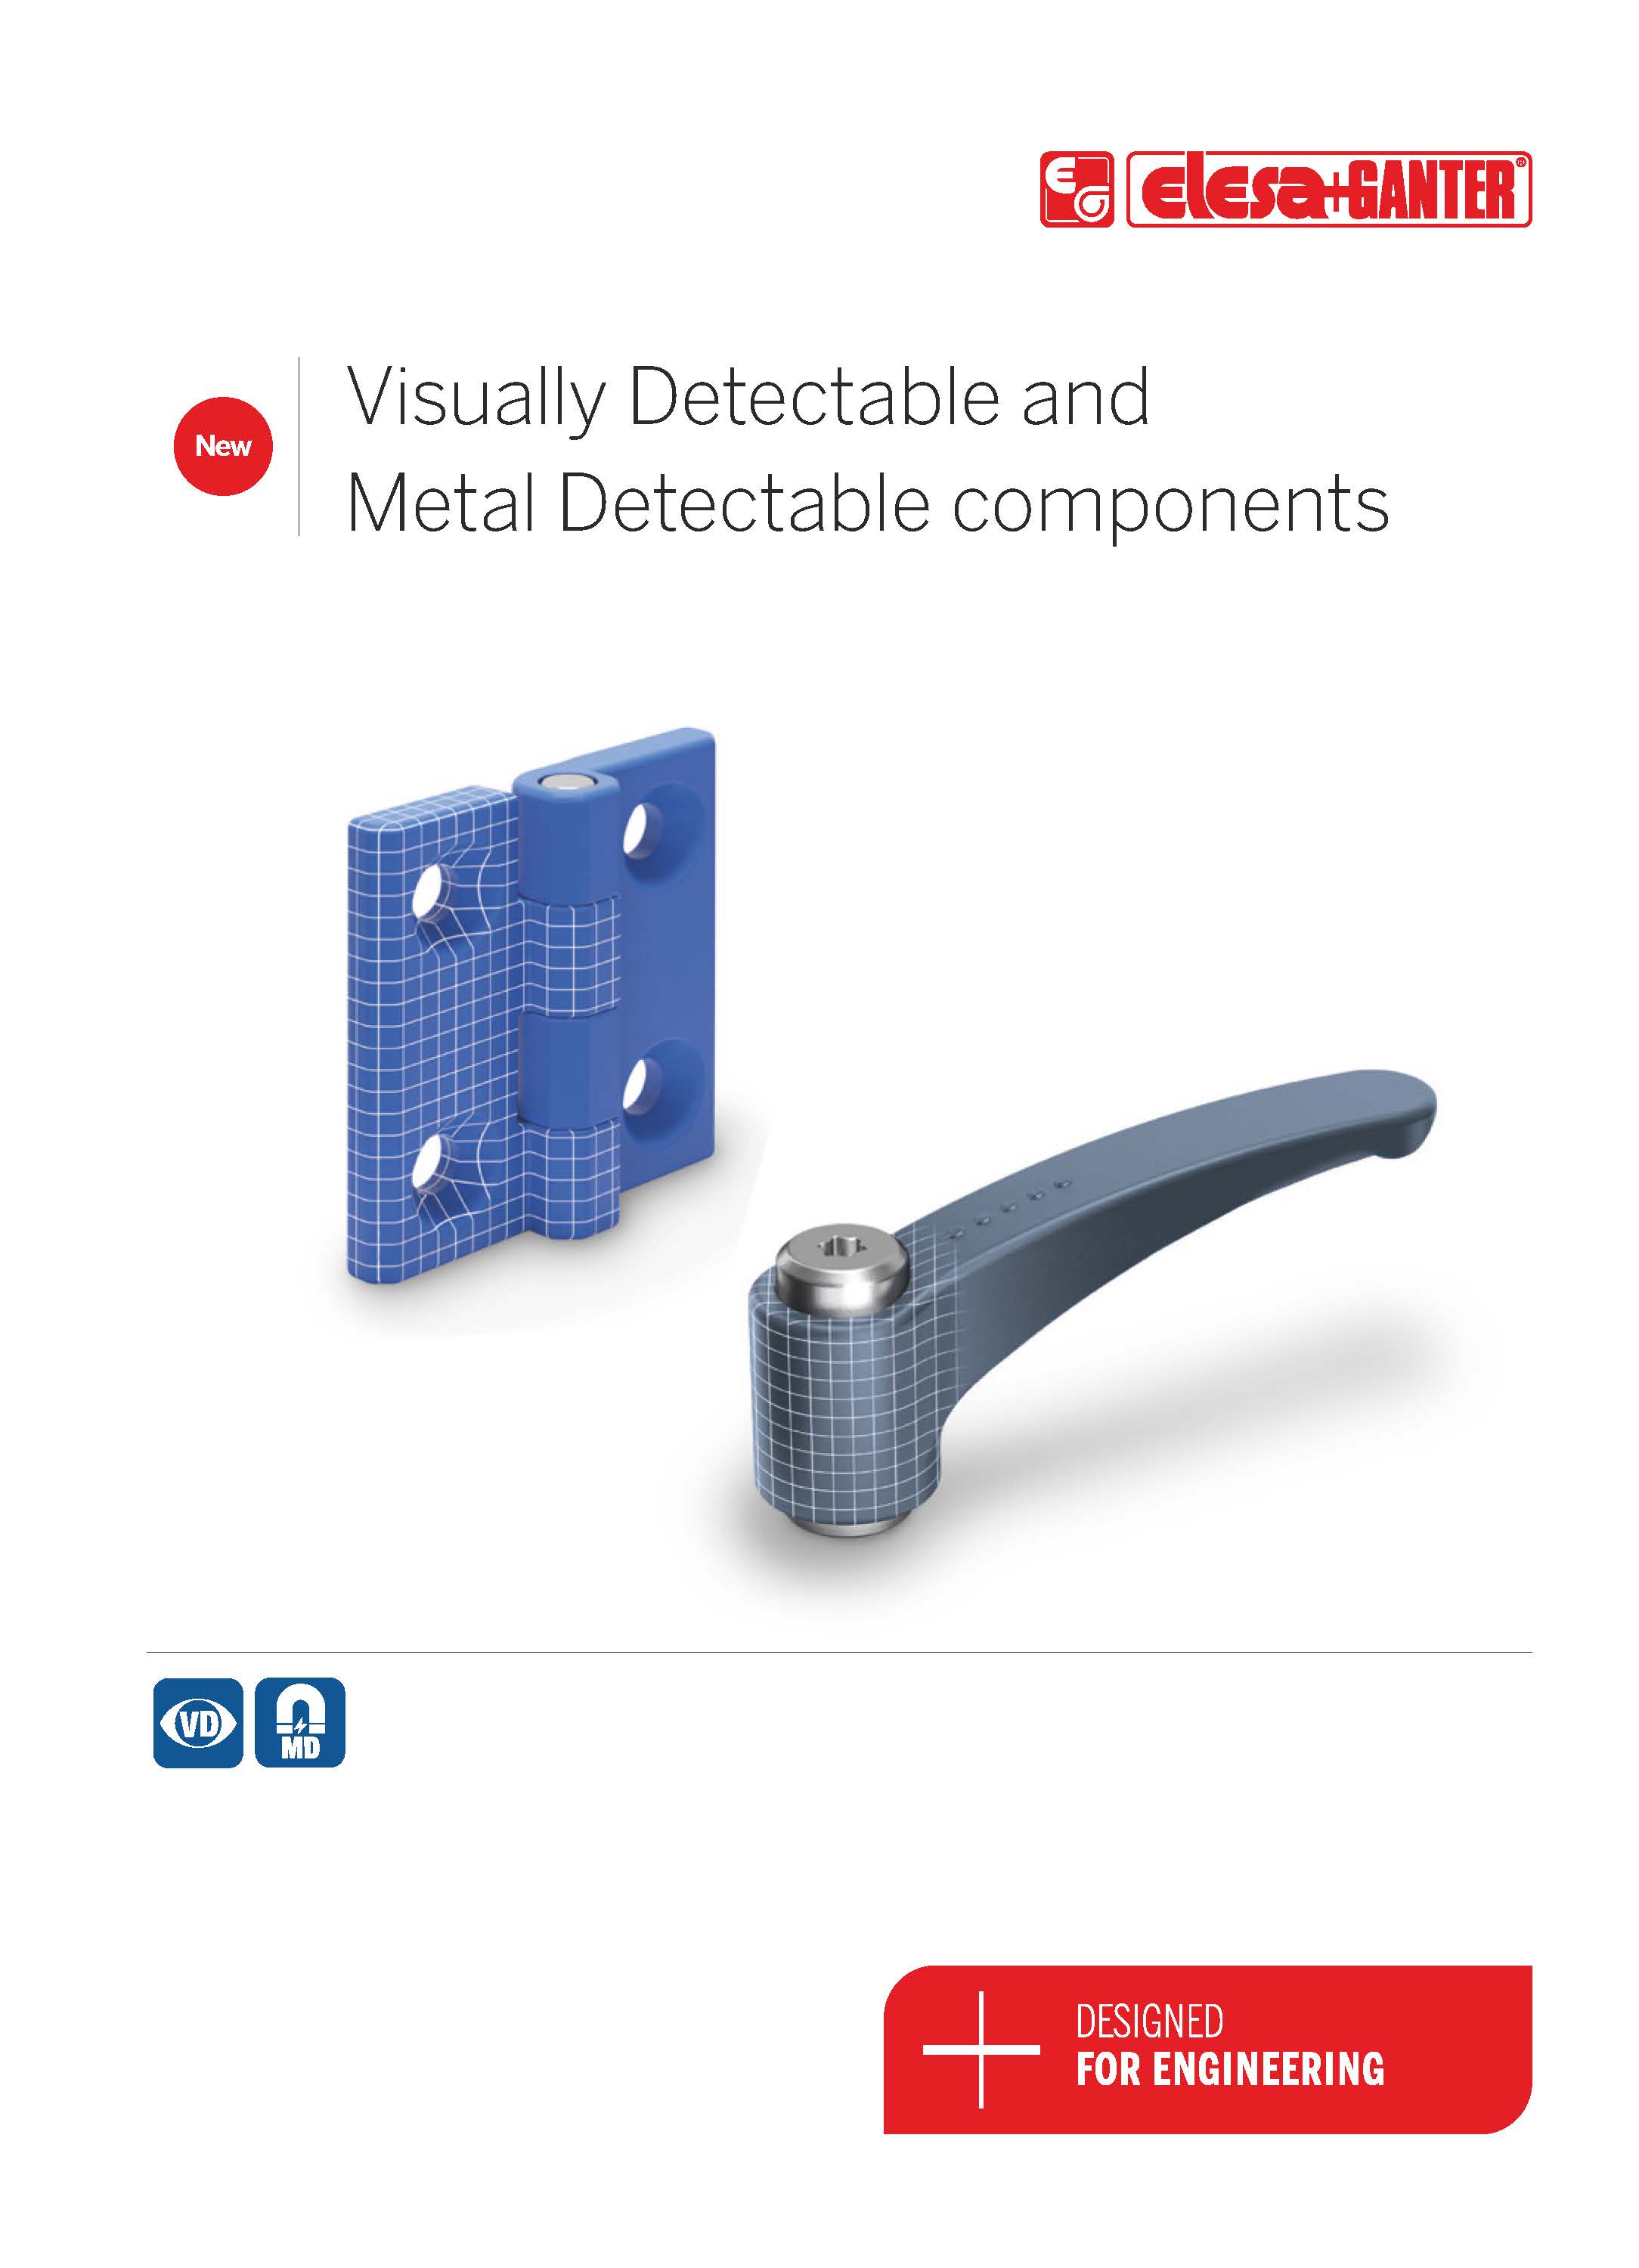 Elesa+Ganter - Visually Detectable and Metal Detectable components